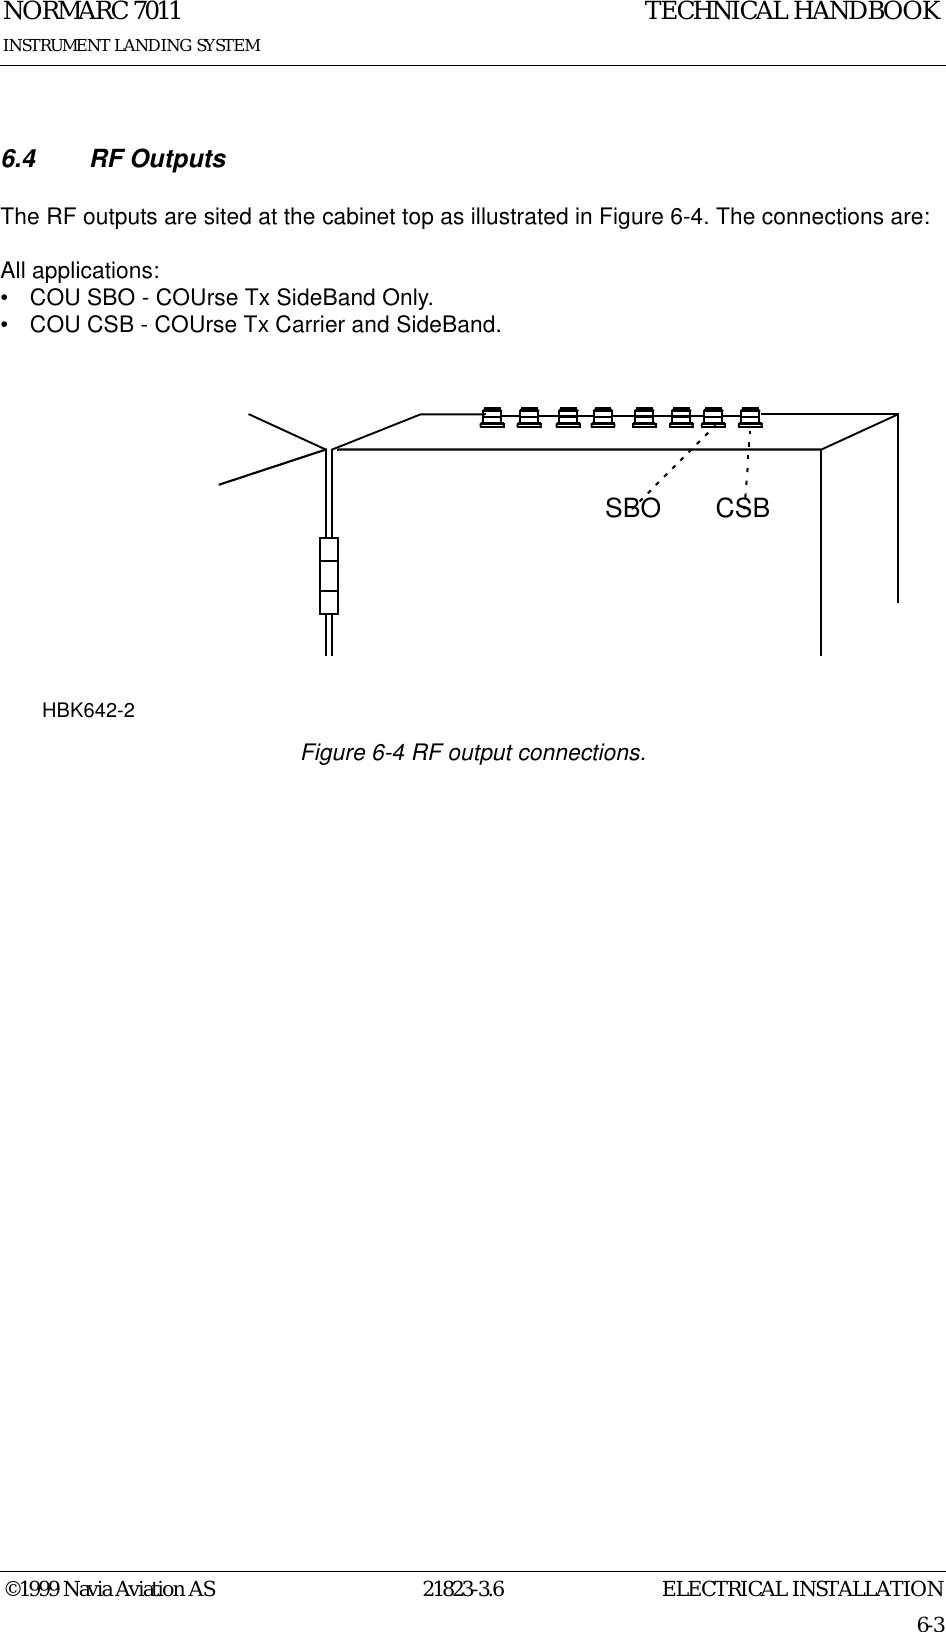 ELECTRICAL INSTALLATIONNORMARC 701121823-3.66-3©1999 Navia Aviation ASINSTRUMENT LANDING SYSTEMTECHNICAL HANDBOOK6.4 RF OutputsThe RF outputs are sited at the cabinet top as illustrated in Figure 6-4. The connections are:All applications:• COU SBO - COUrse Tx SideBand Only.• COU CSB - COUrse Tx Carrier and SideBand.  Figure 6-4 RF output connections.CSBSBOHBK642-2